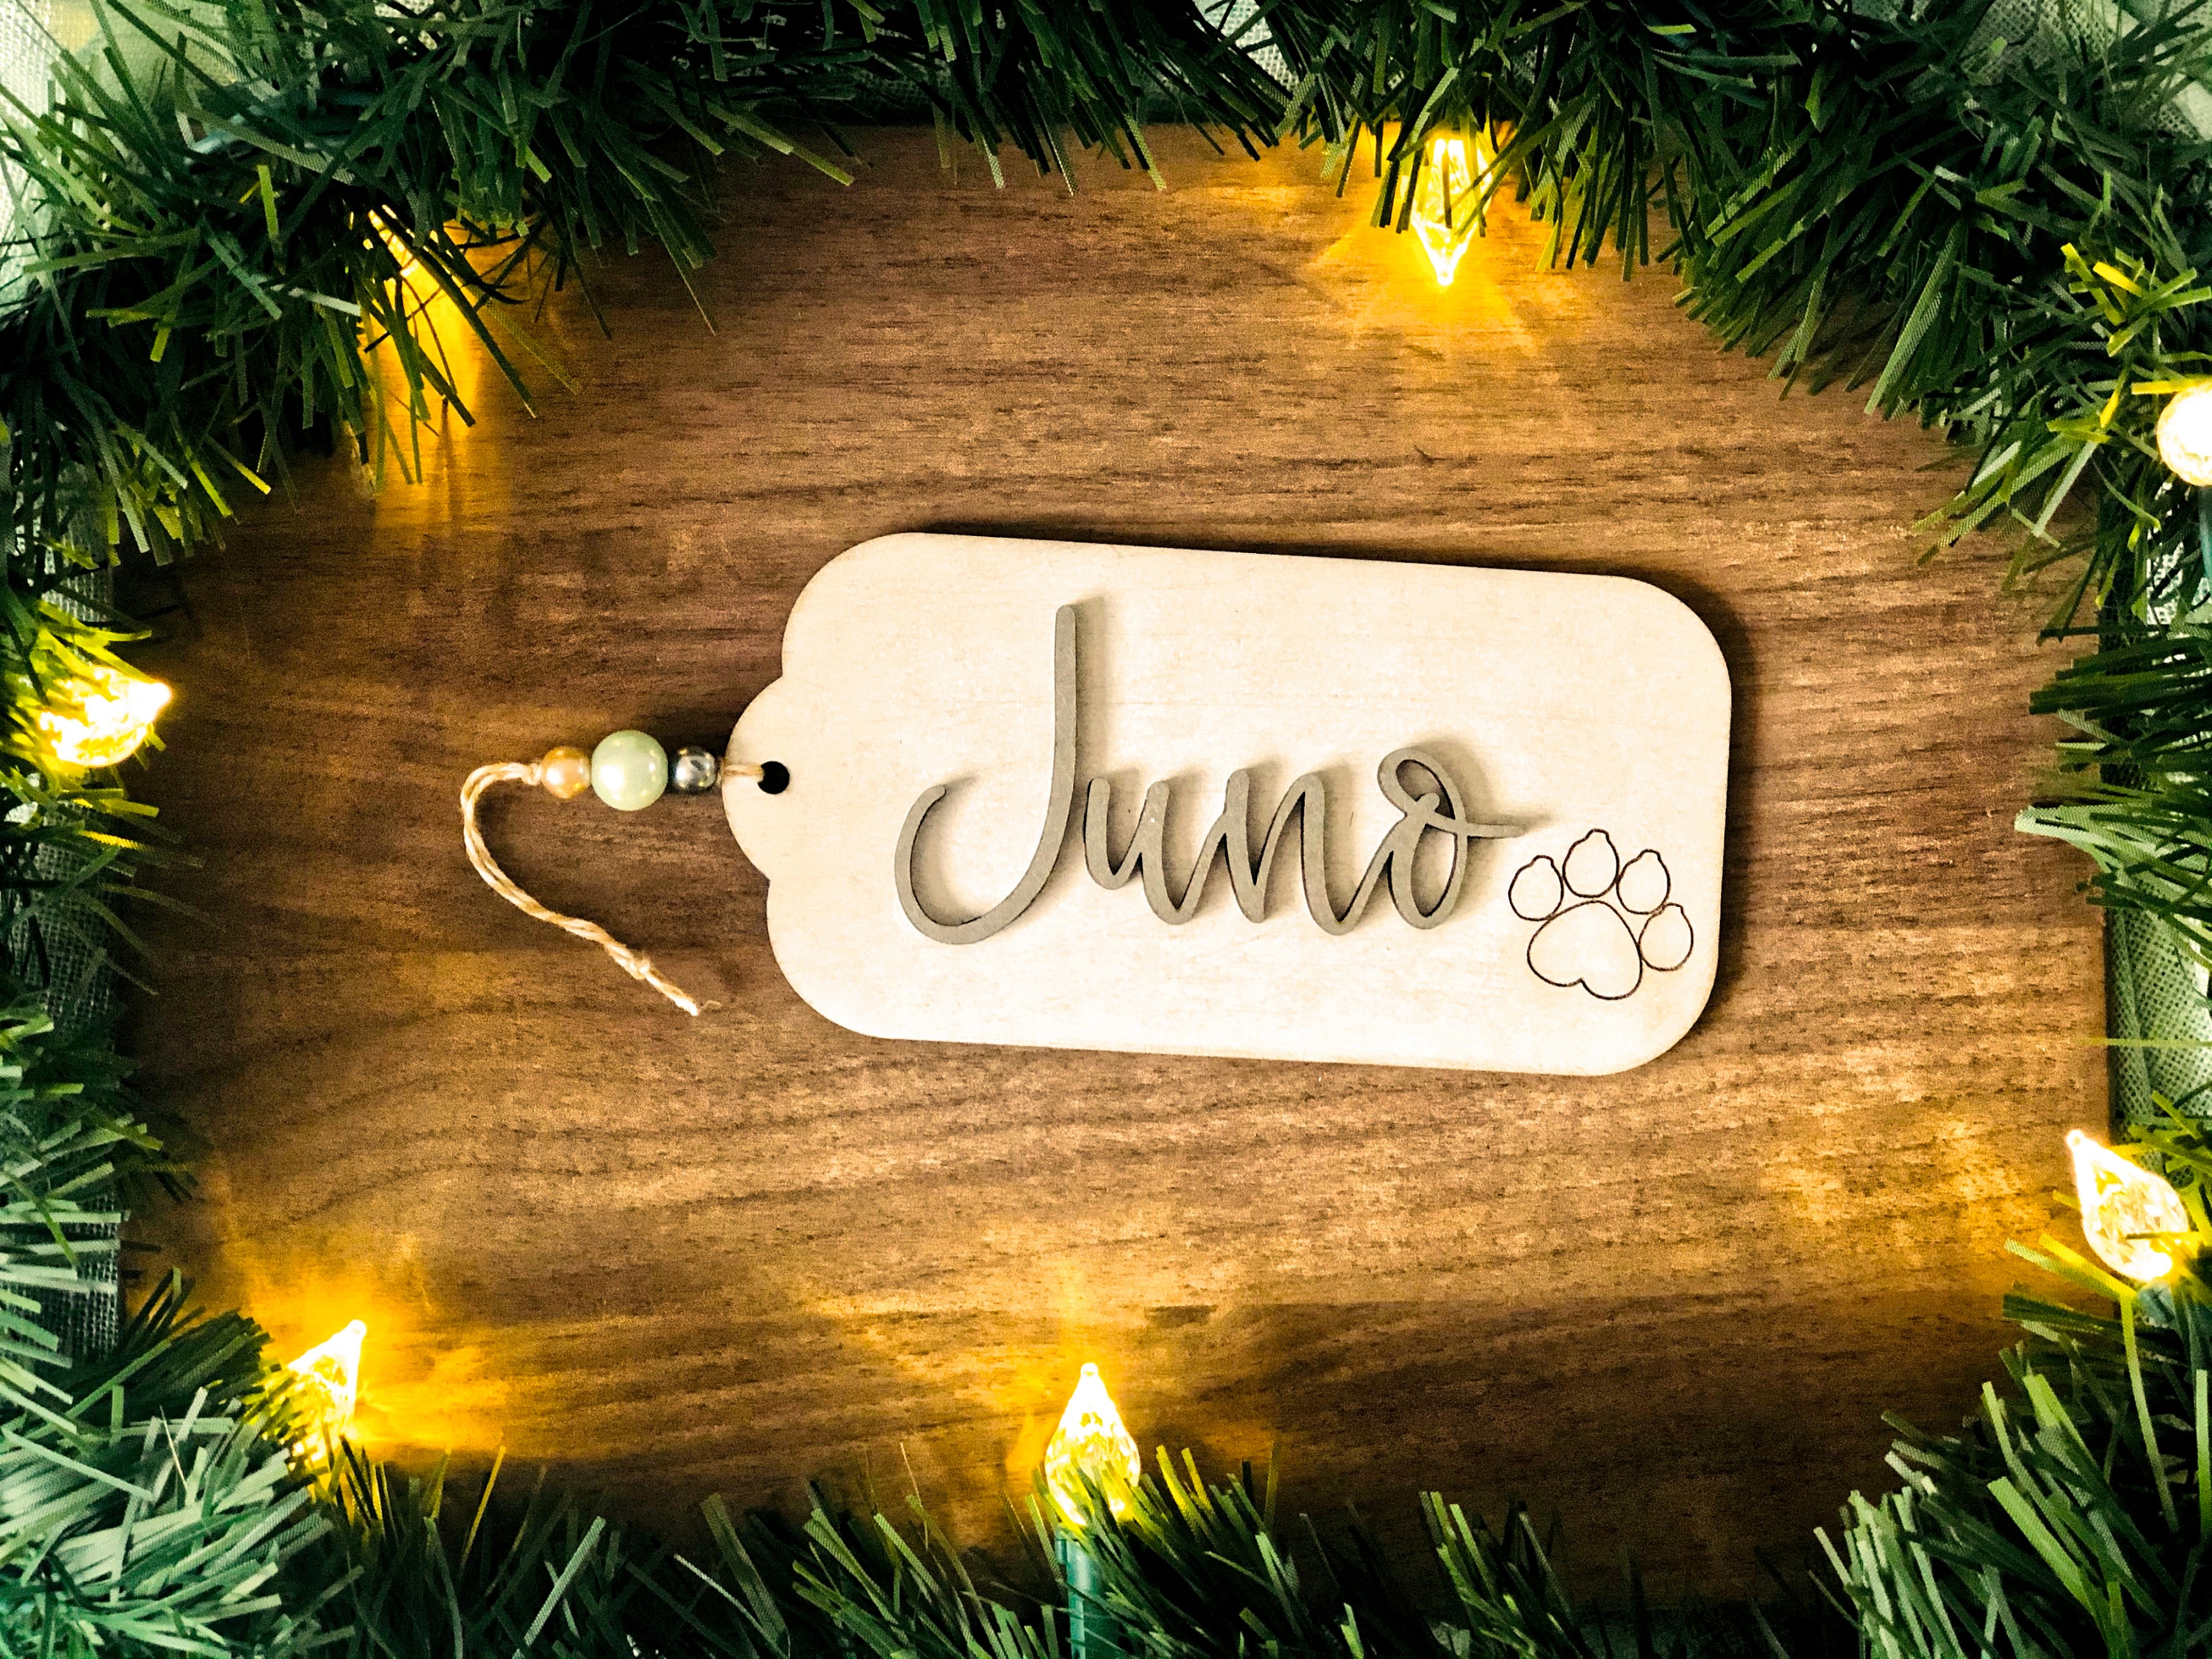 BEST SELLER ENGRAVED Christmas Stocking Name Tag. Pet Wooden 